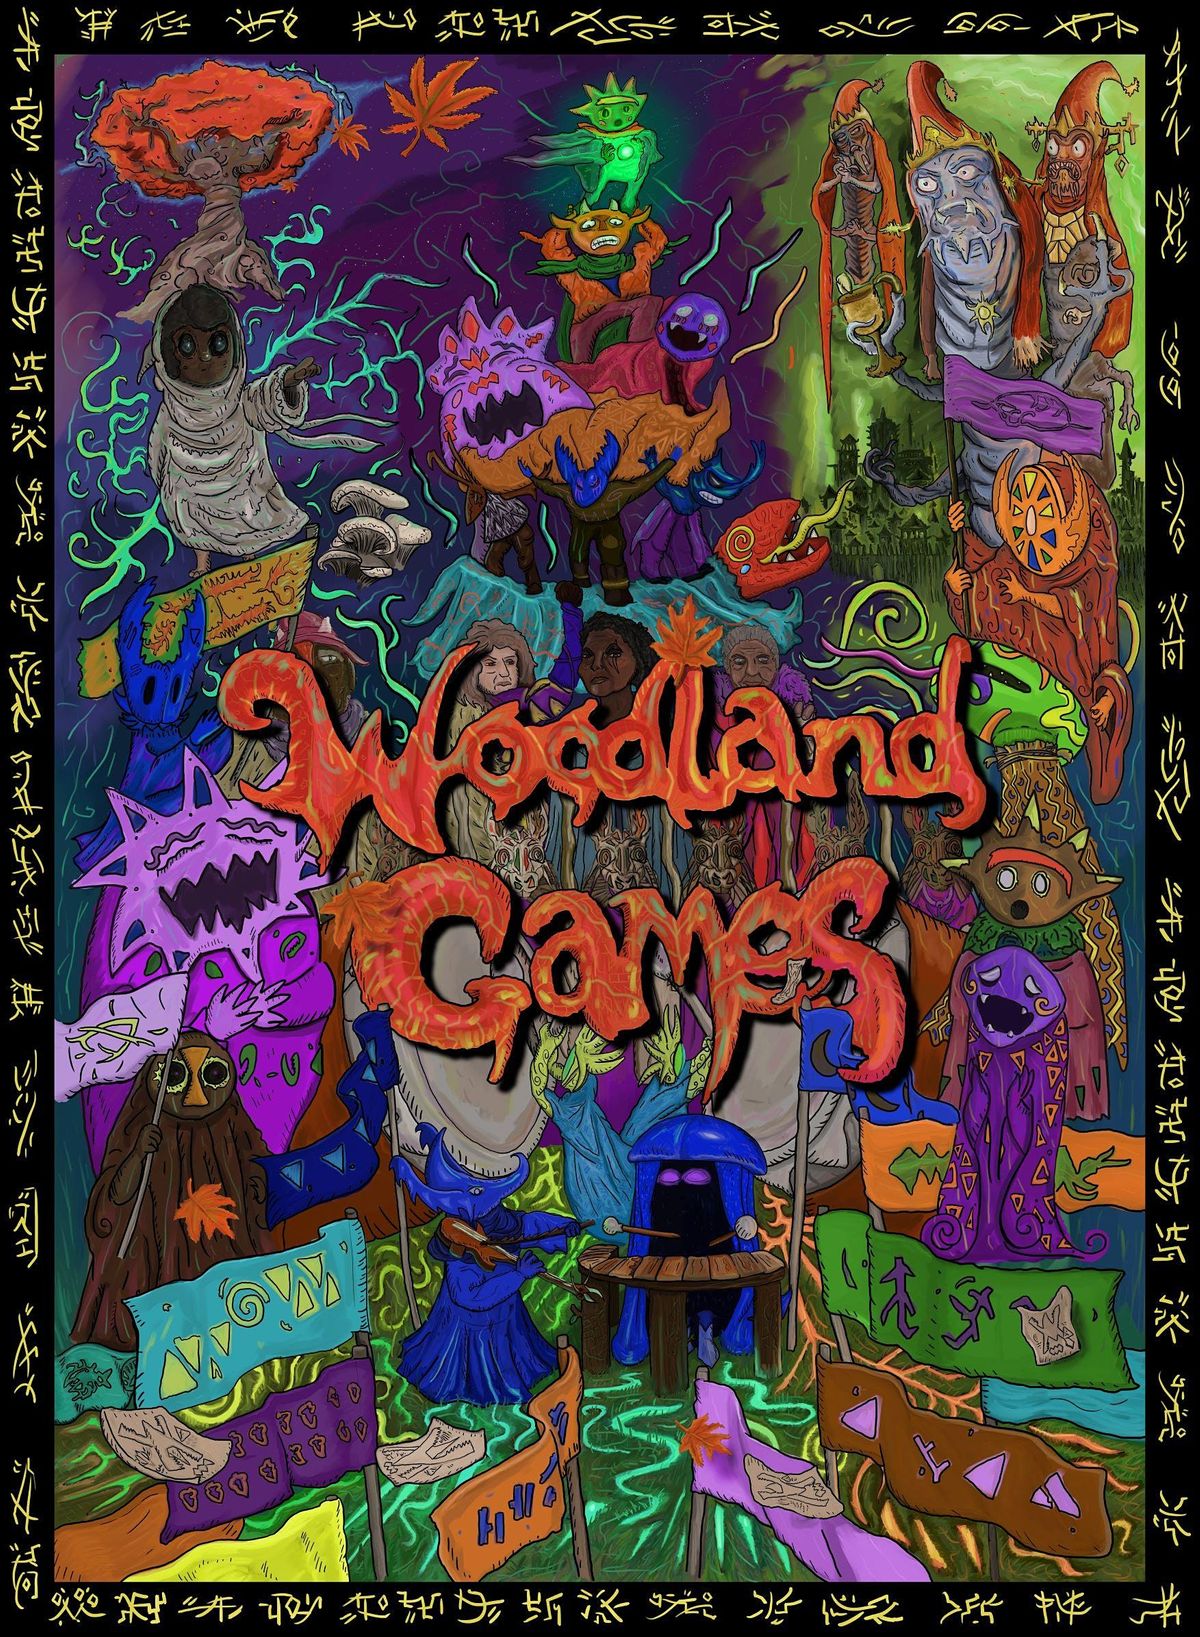 10 to 11 Presents 'Woodland Games' with Hipkiss & Graney